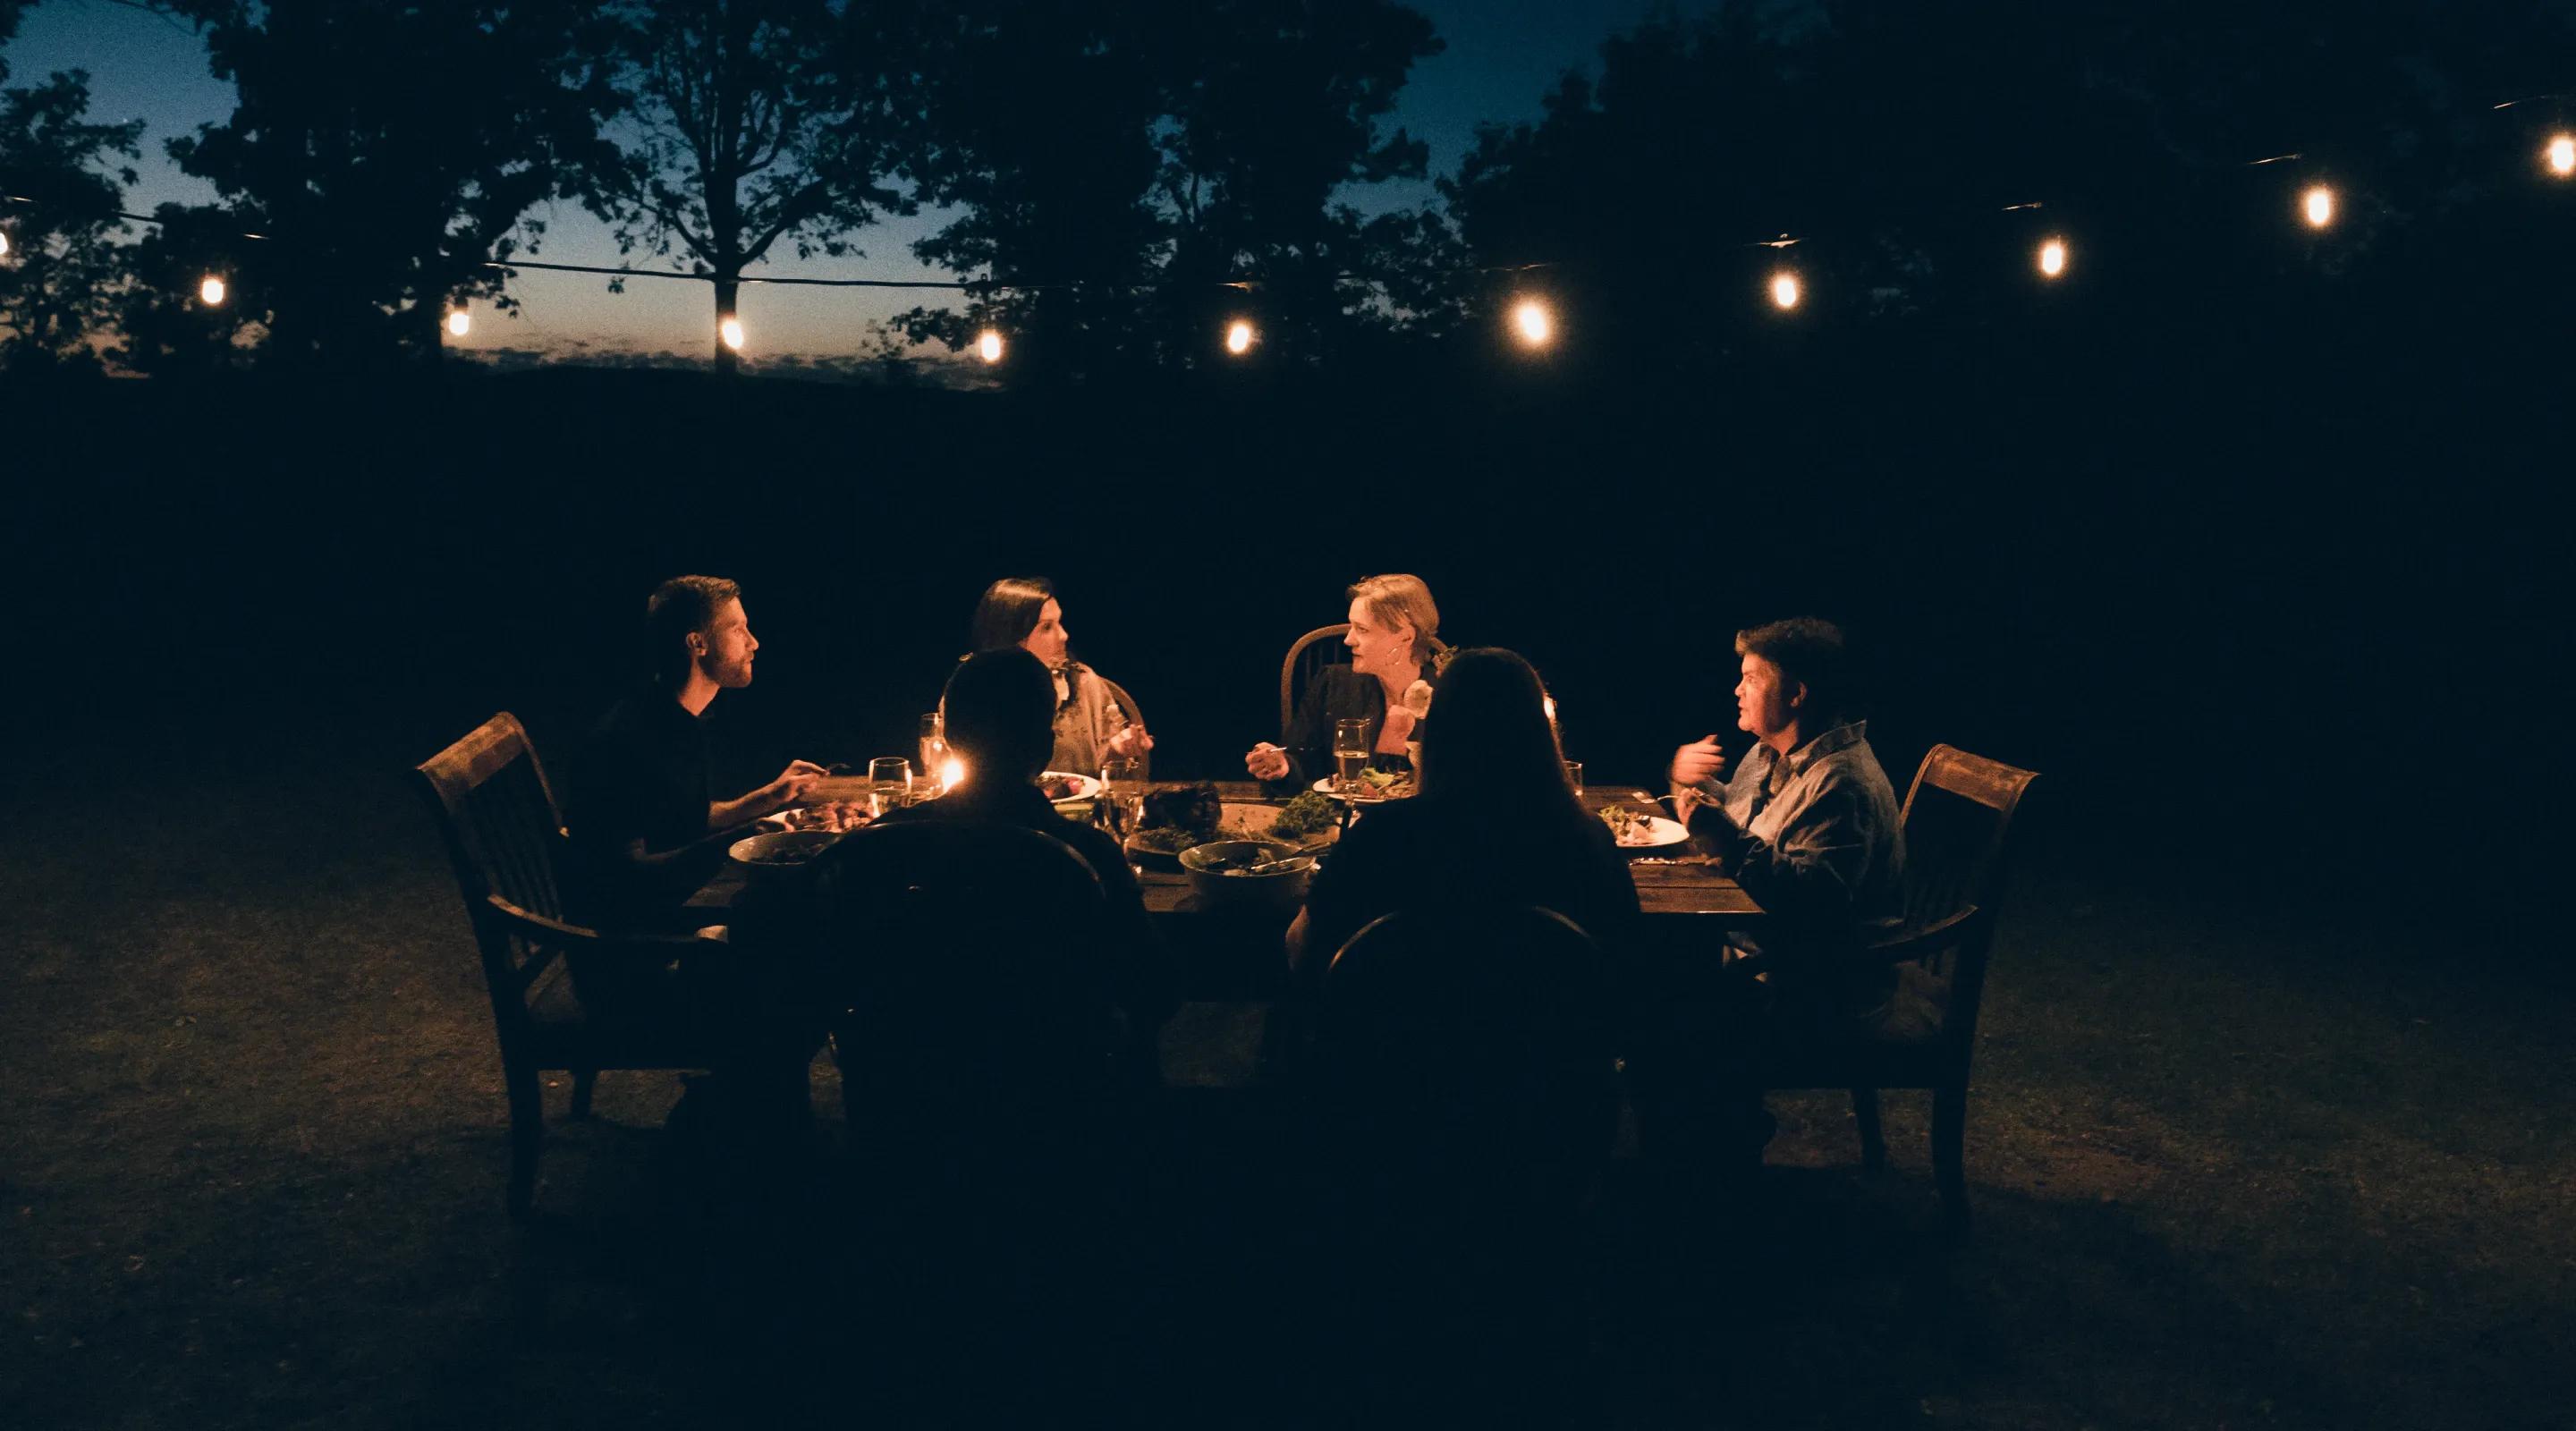 Image of people having sunset dinner outdoors.